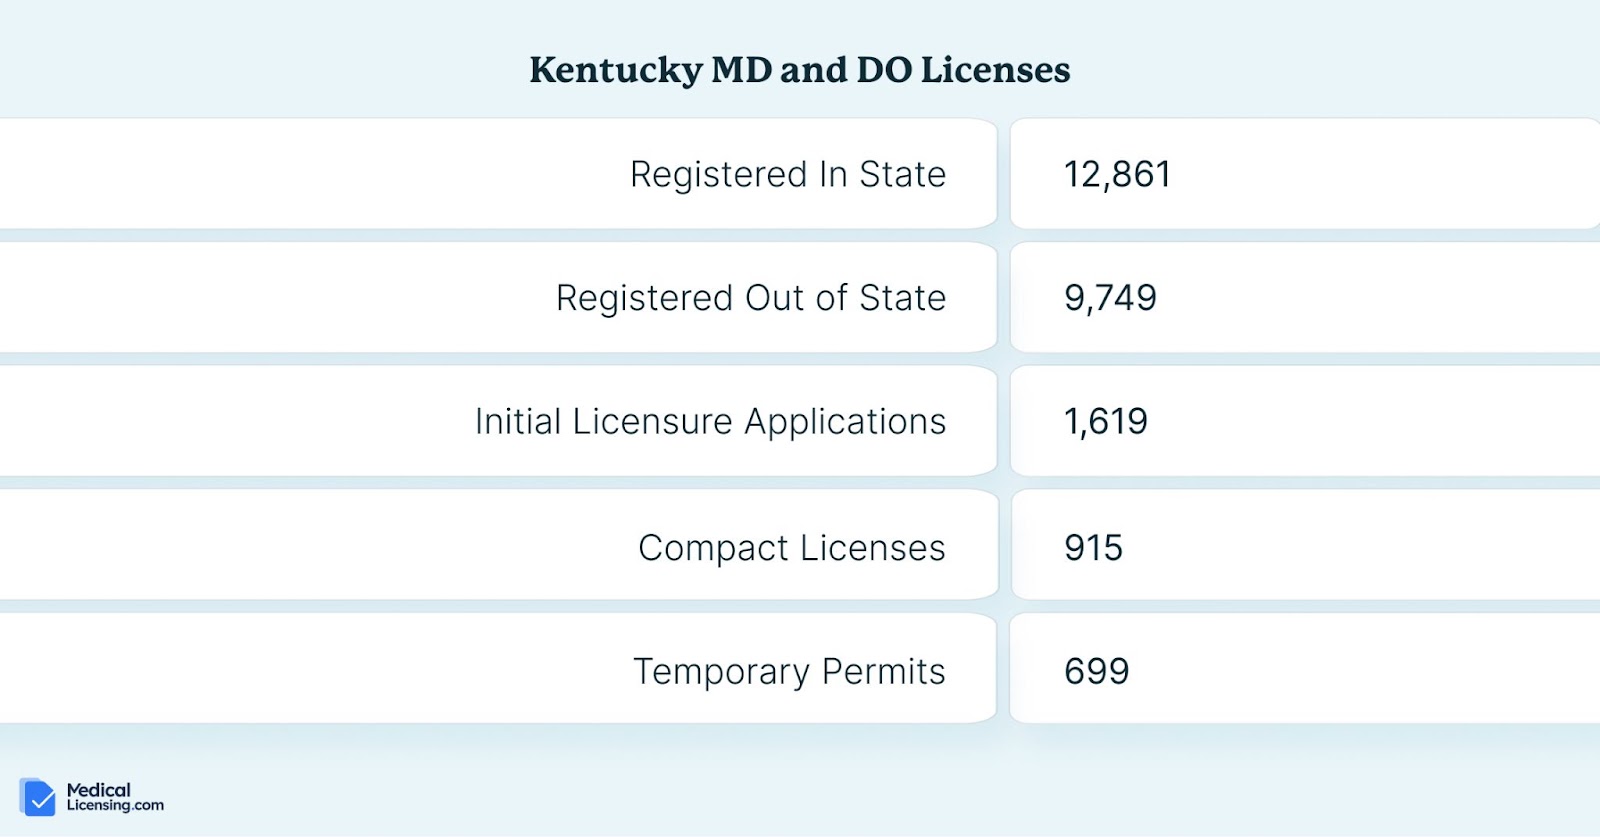 kentucky medical licenses for md and do